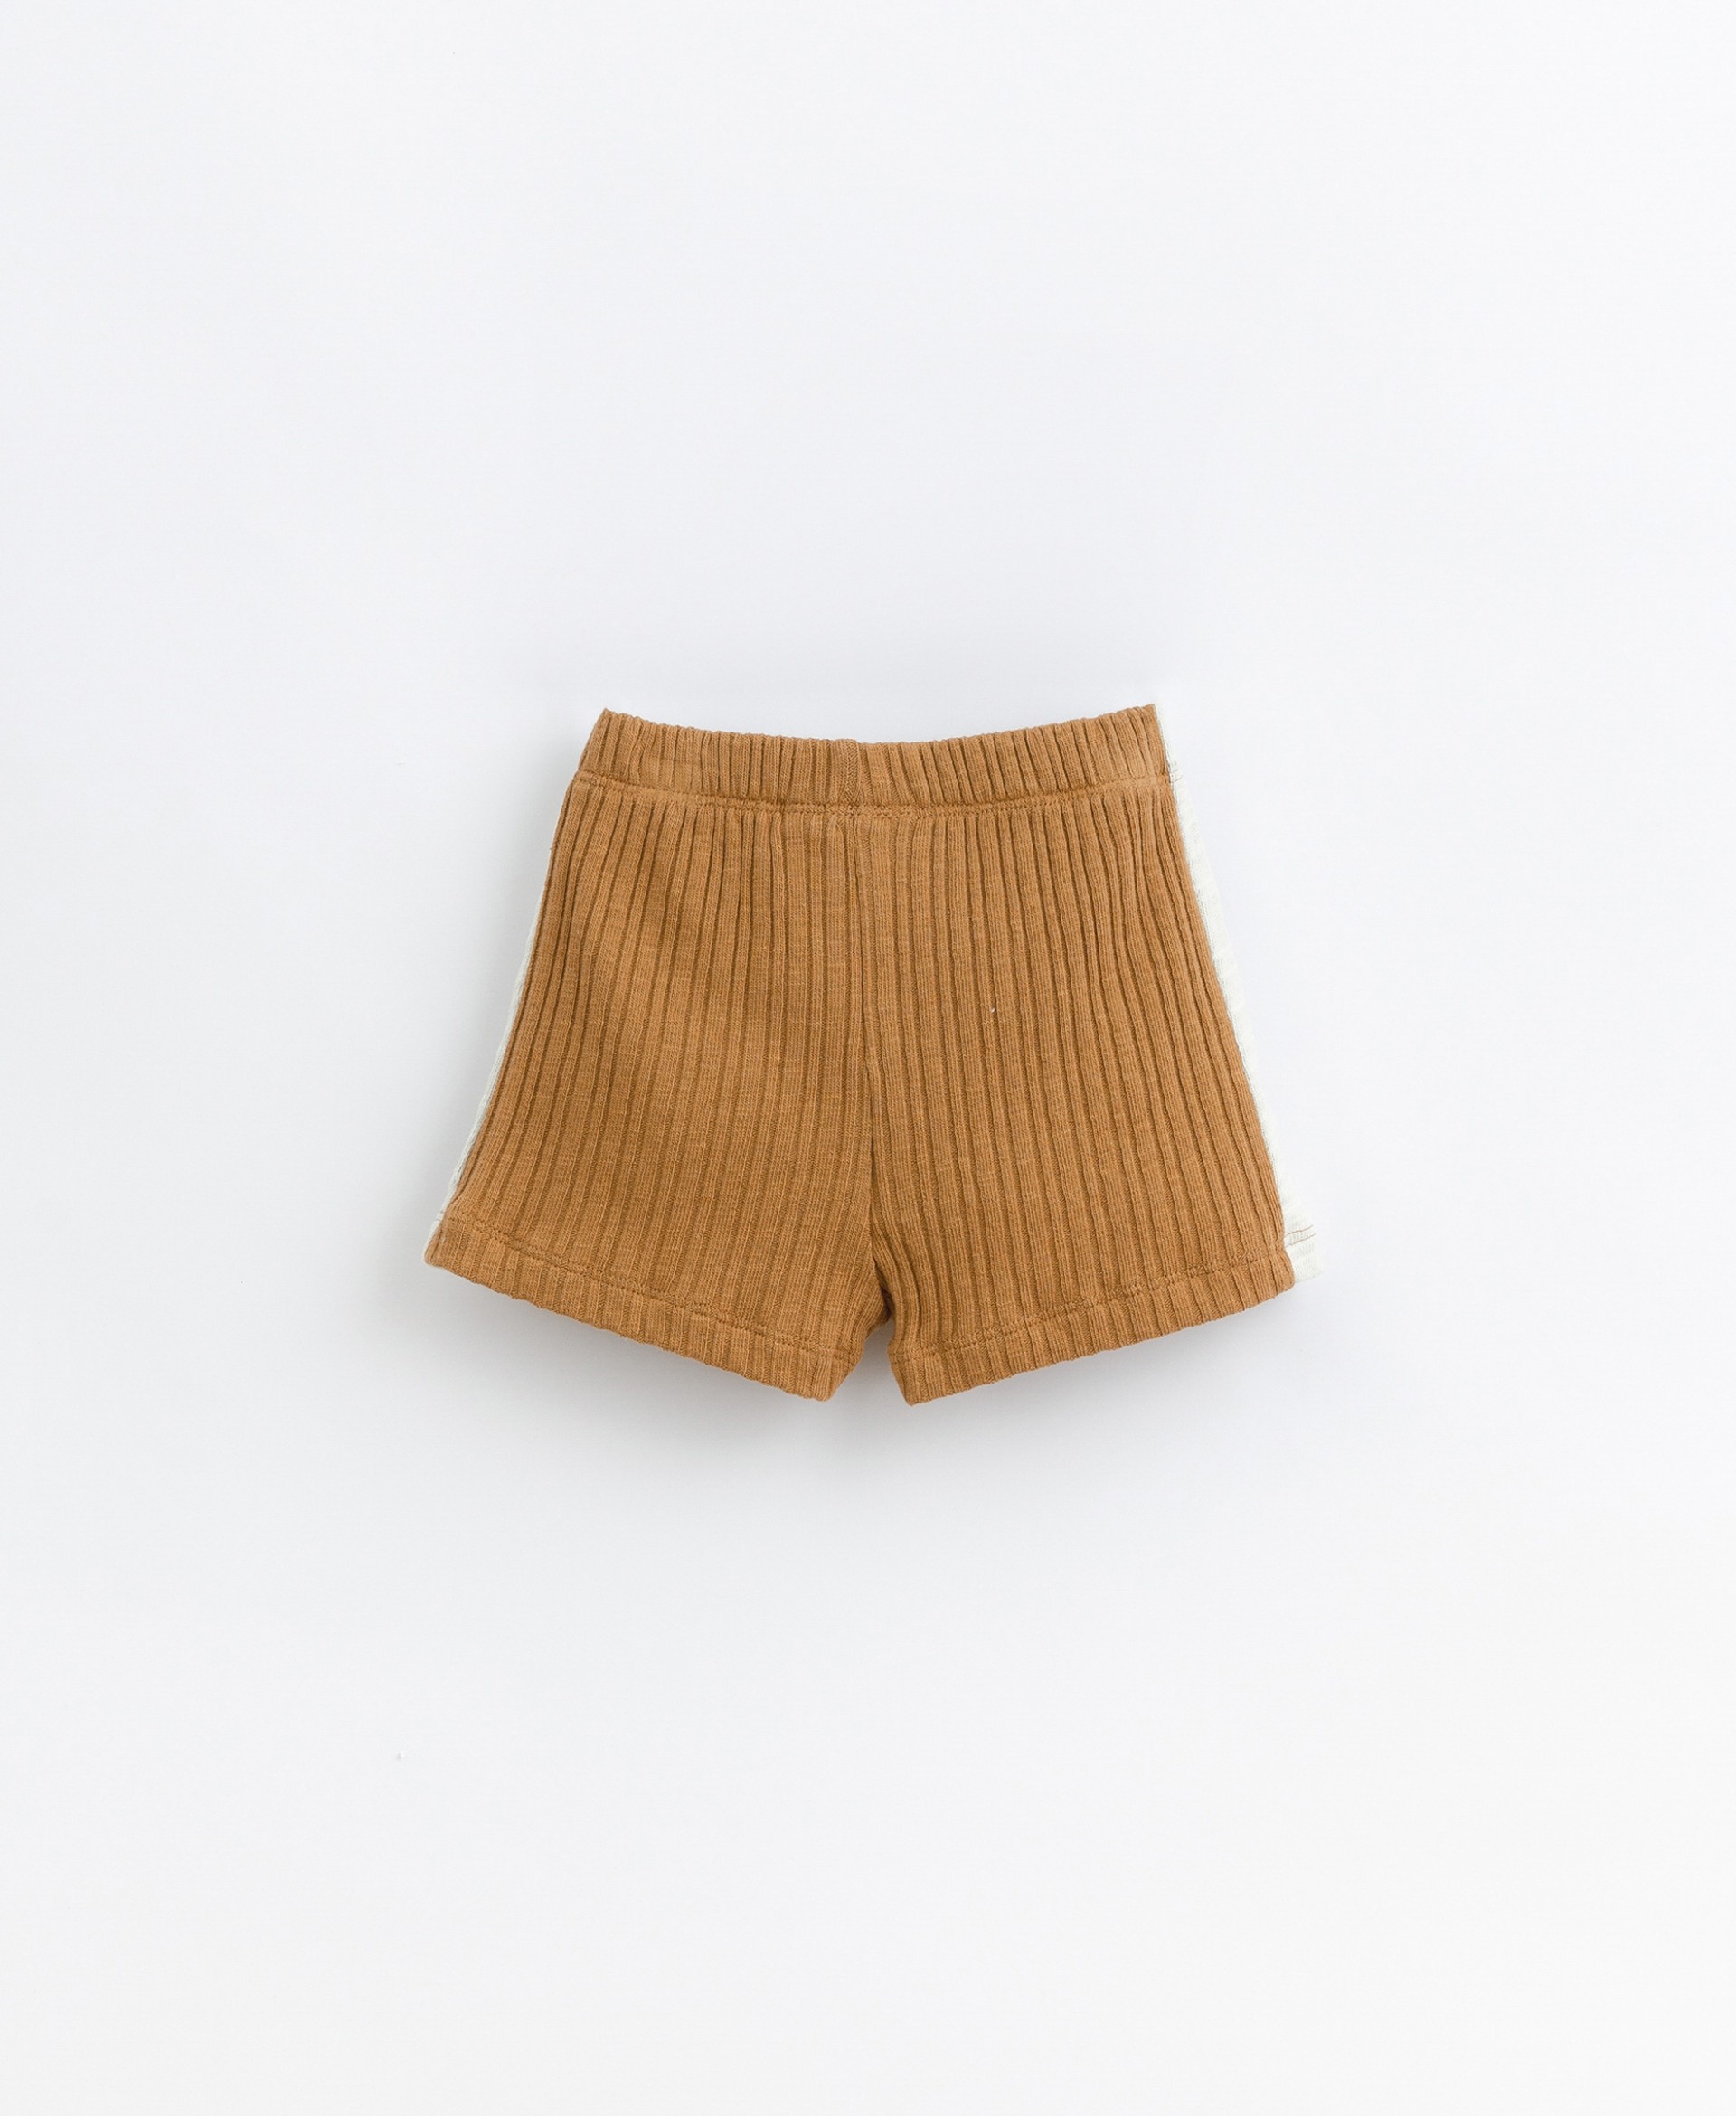 Shorts with contrasting in-set | Basketry